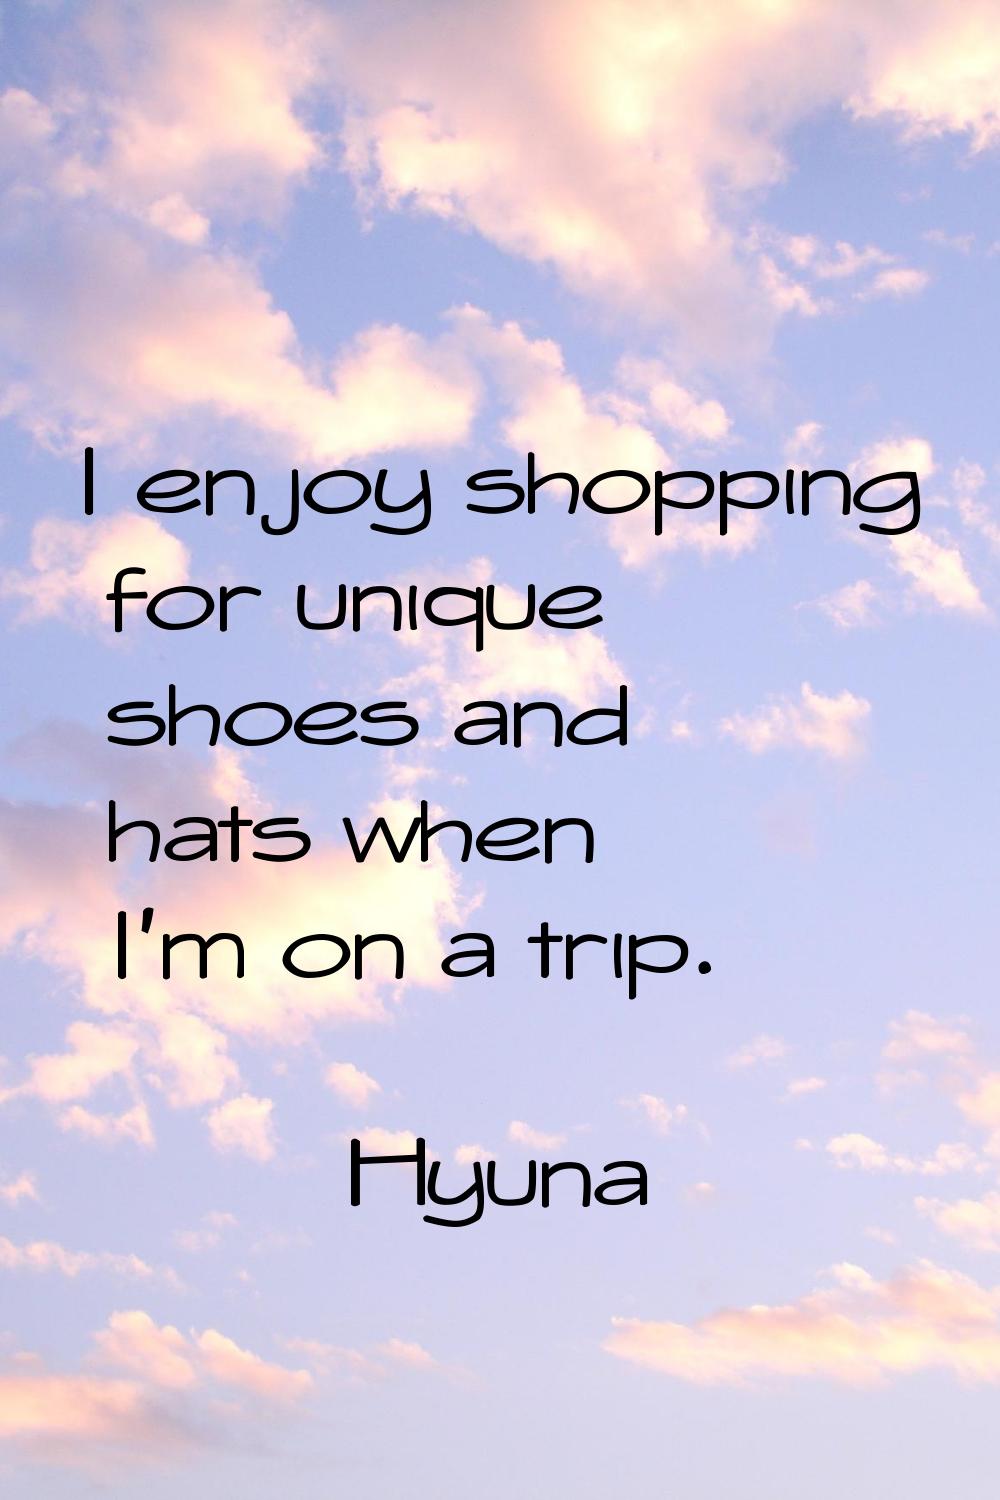 I enjoy shopping for unique shoes and hats when I'm on a trip.